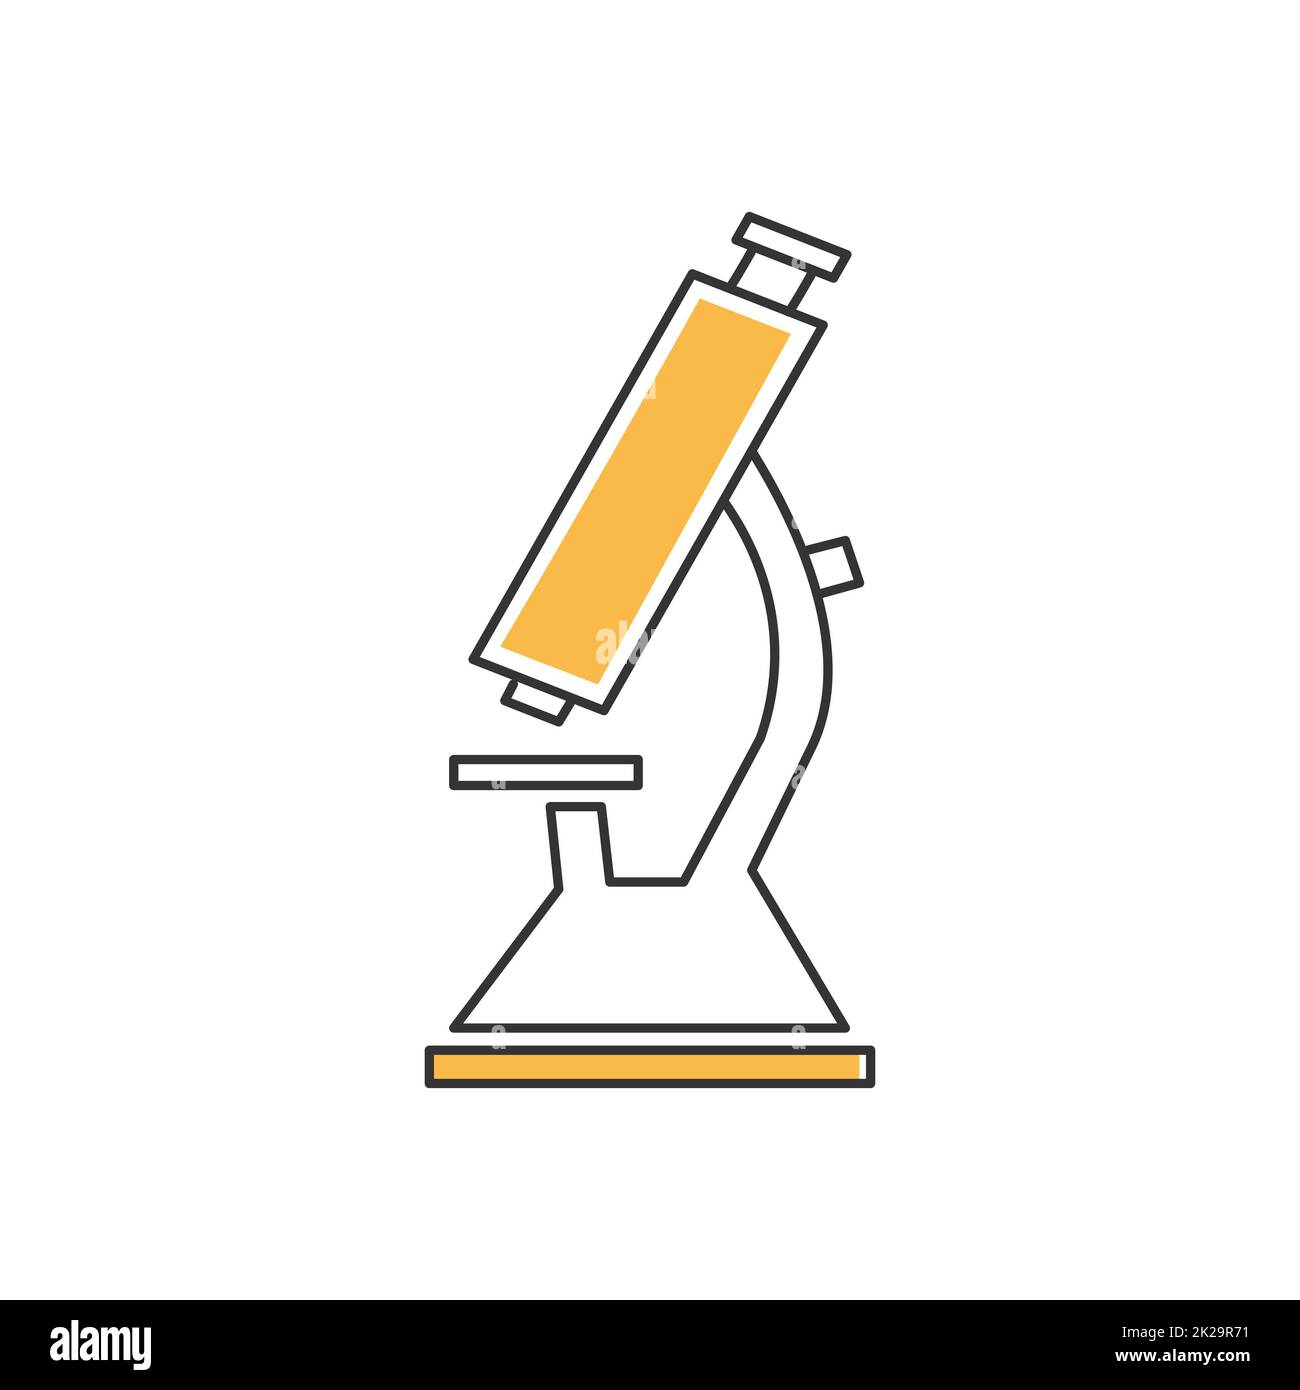 Stylish thin line icon of a microscope on a white background - Vector Stock Photo